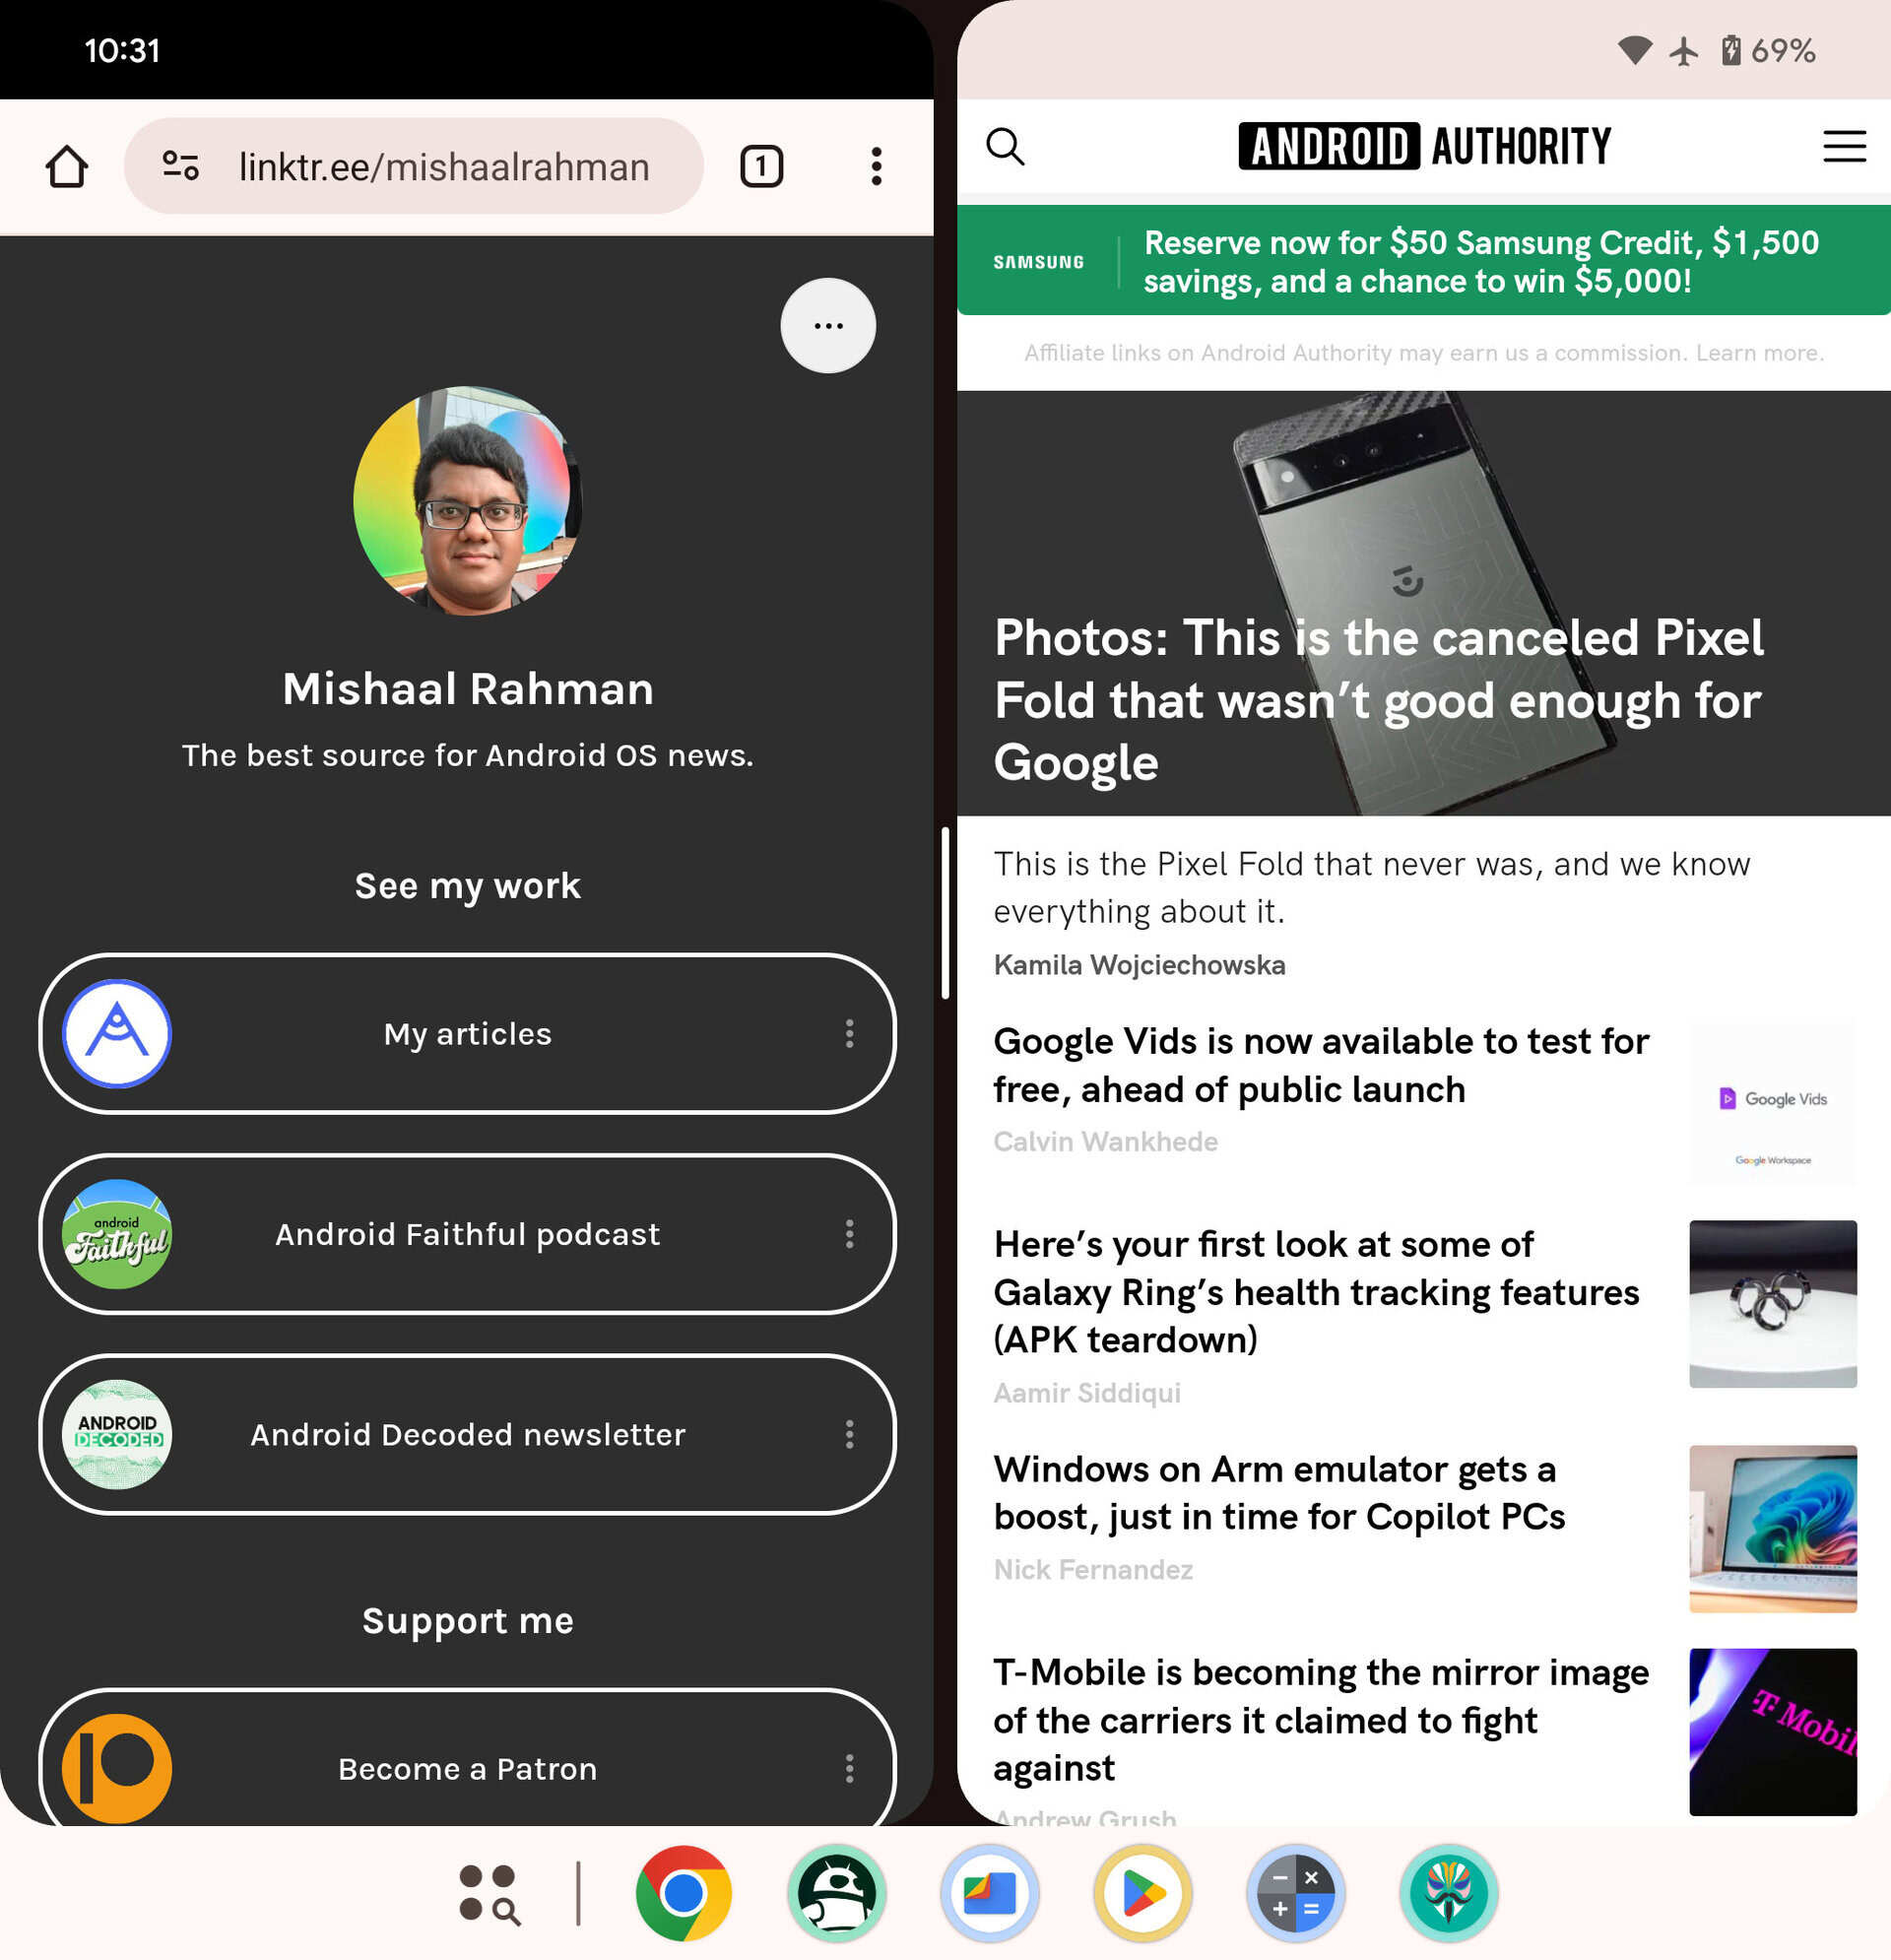 Google has been working on on enhanced split-screen mode for its upcoming foldable